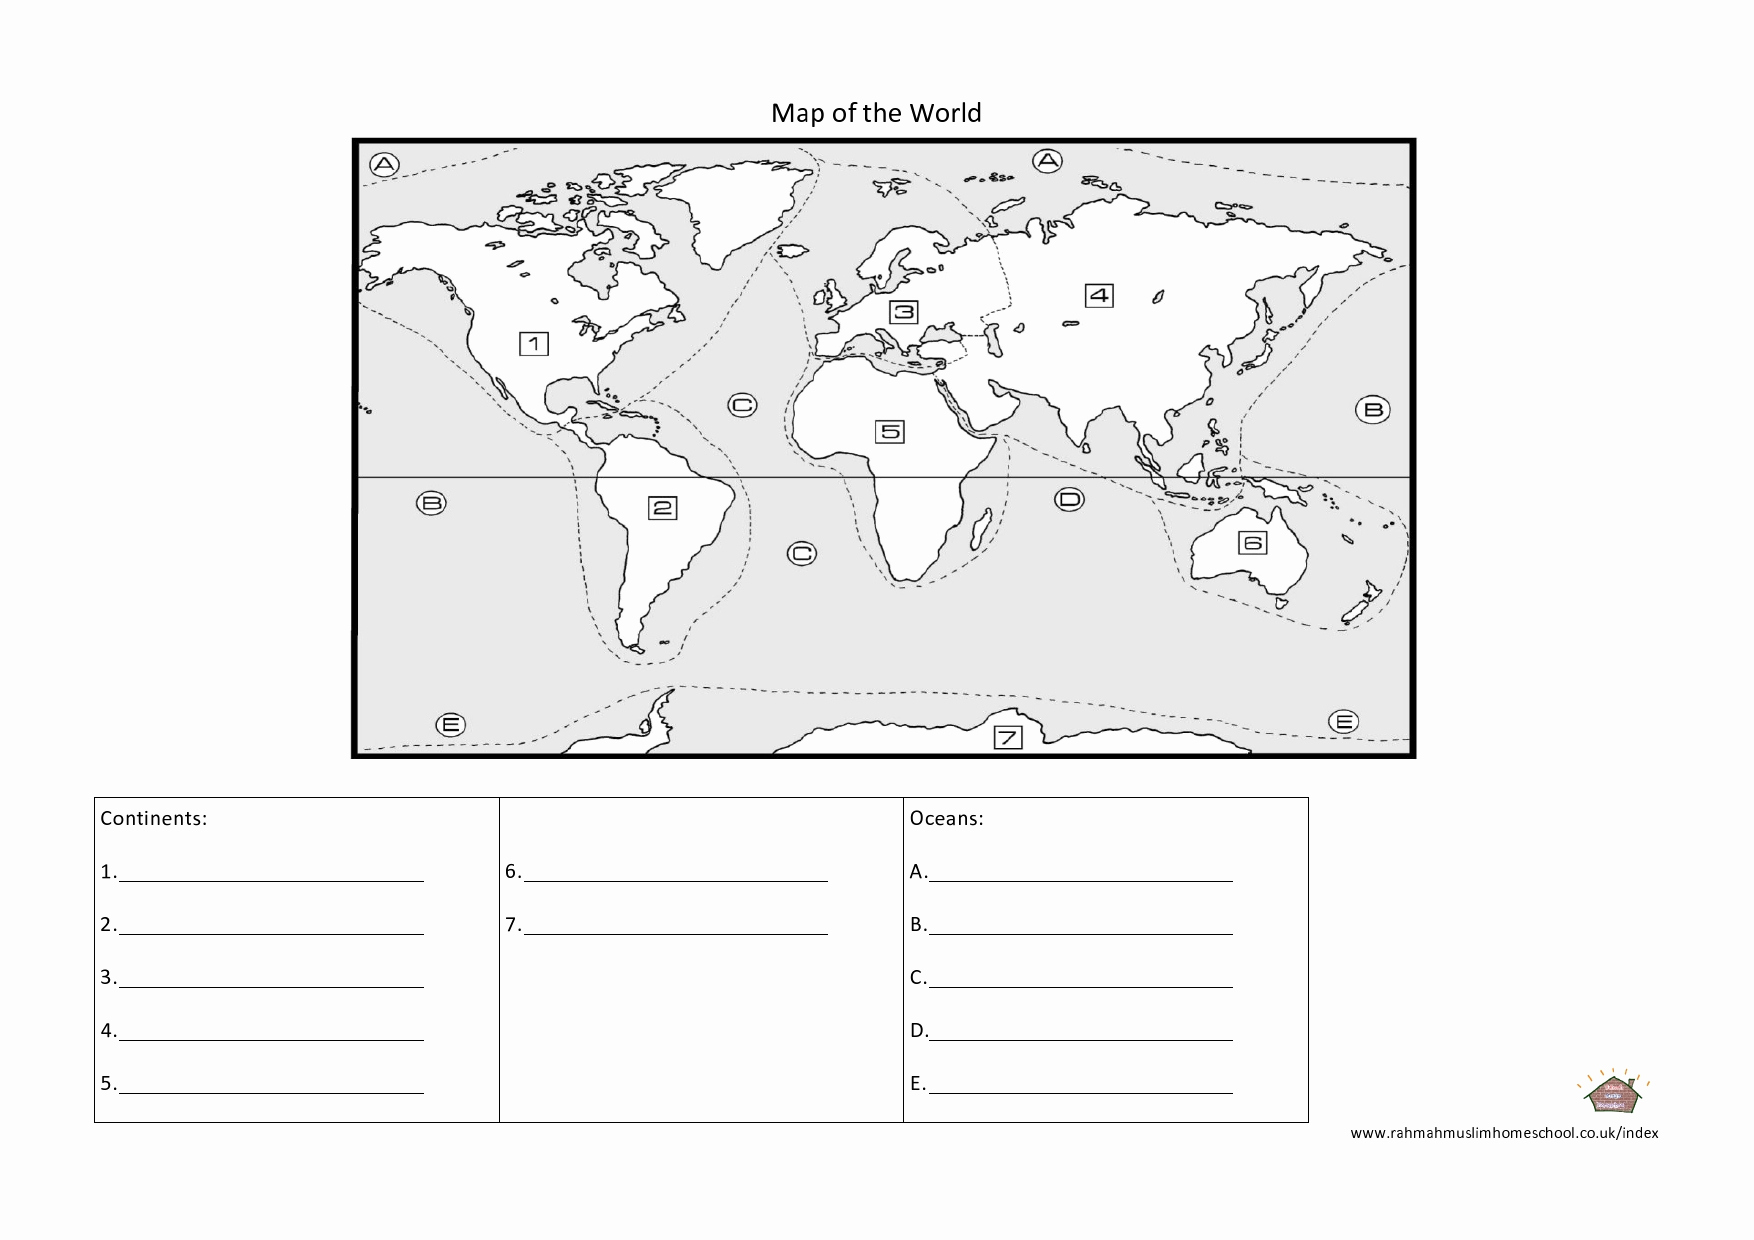 Continents and Oceans Worksheet Printable Luxury 14 Best Of Seven Continents Worksheet Printable